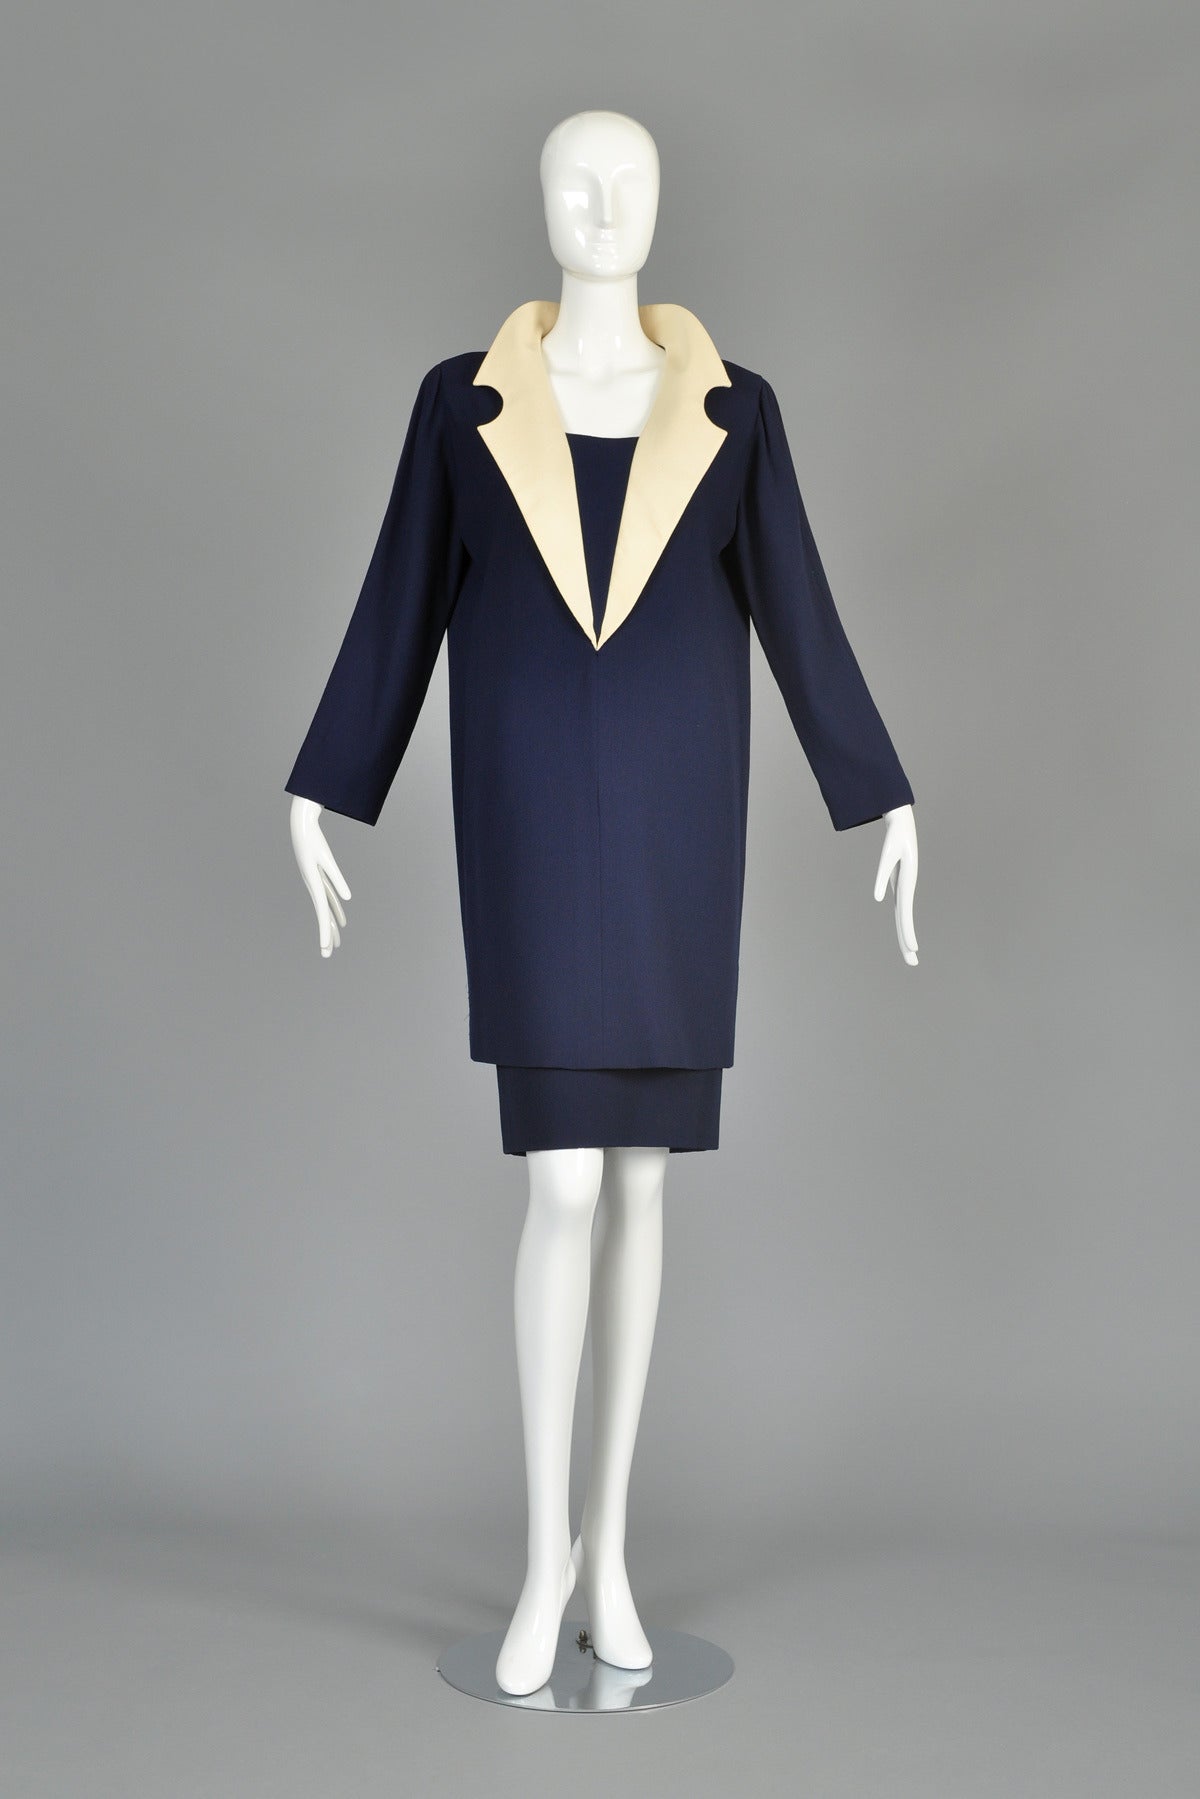 Circa 92/93 vintage Pierre Cardin haute couture ensemble. Incredible, extremely hard to find piece. Dark navy blue light to mid-weight wool crepe. Simple high-waist skirt tapers at the knee. Matching tunic features wide set shoulders and tapered